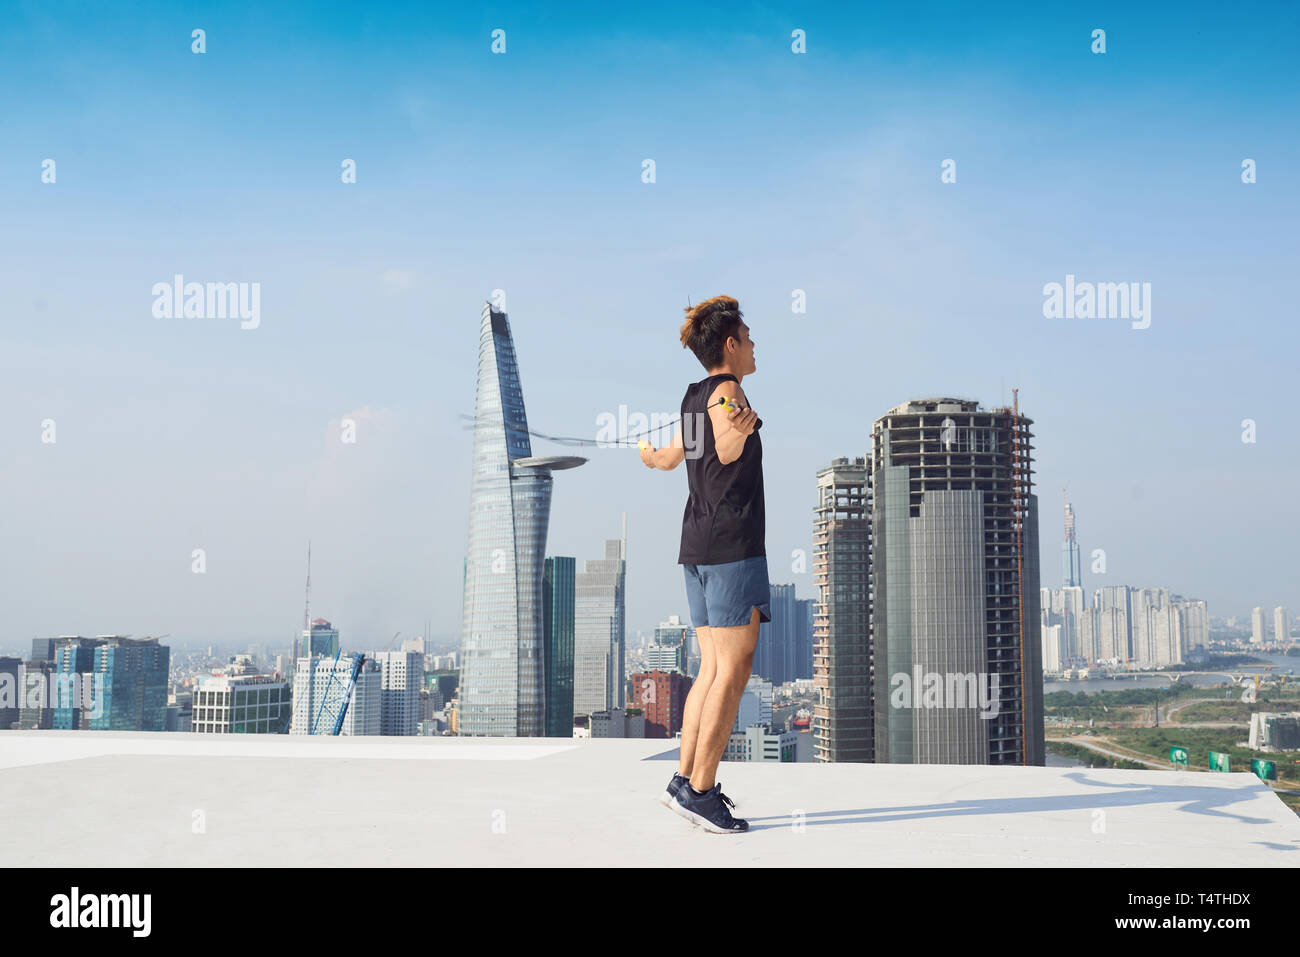 fitness, sport, people, exercising and lifestyle concept - man skipping with jump rope outdoors Stock Photo